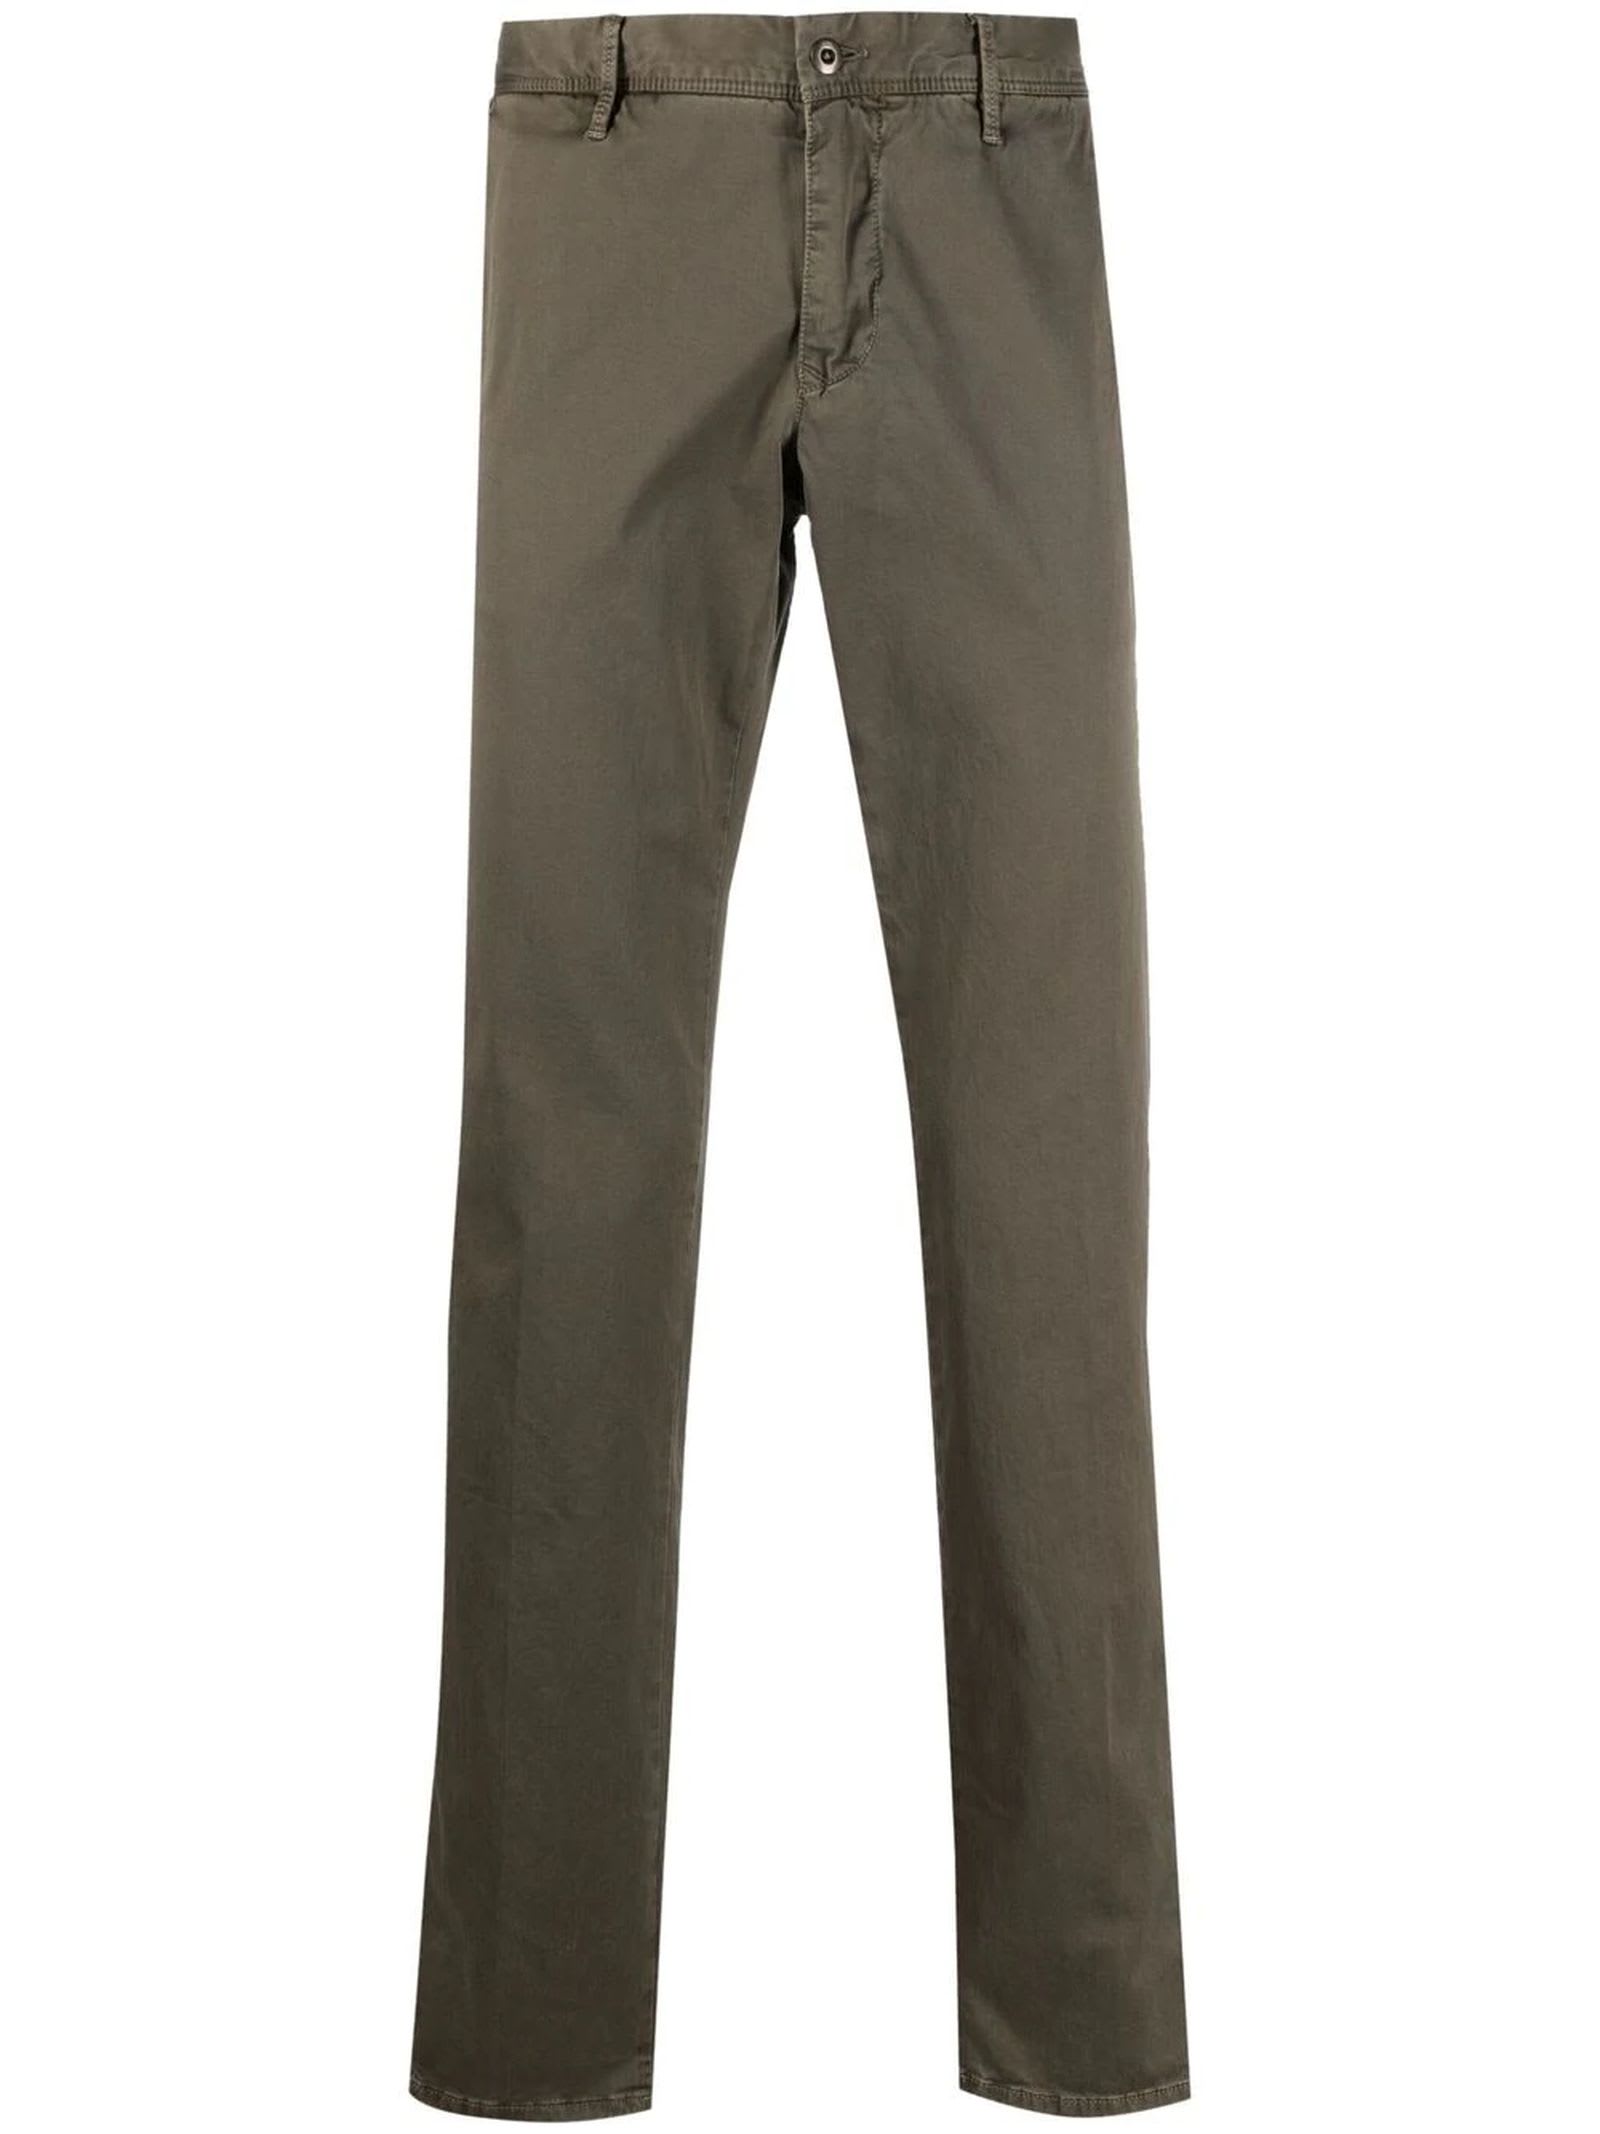 Incotex Olive Green Stretch Cotton Chino Trousers